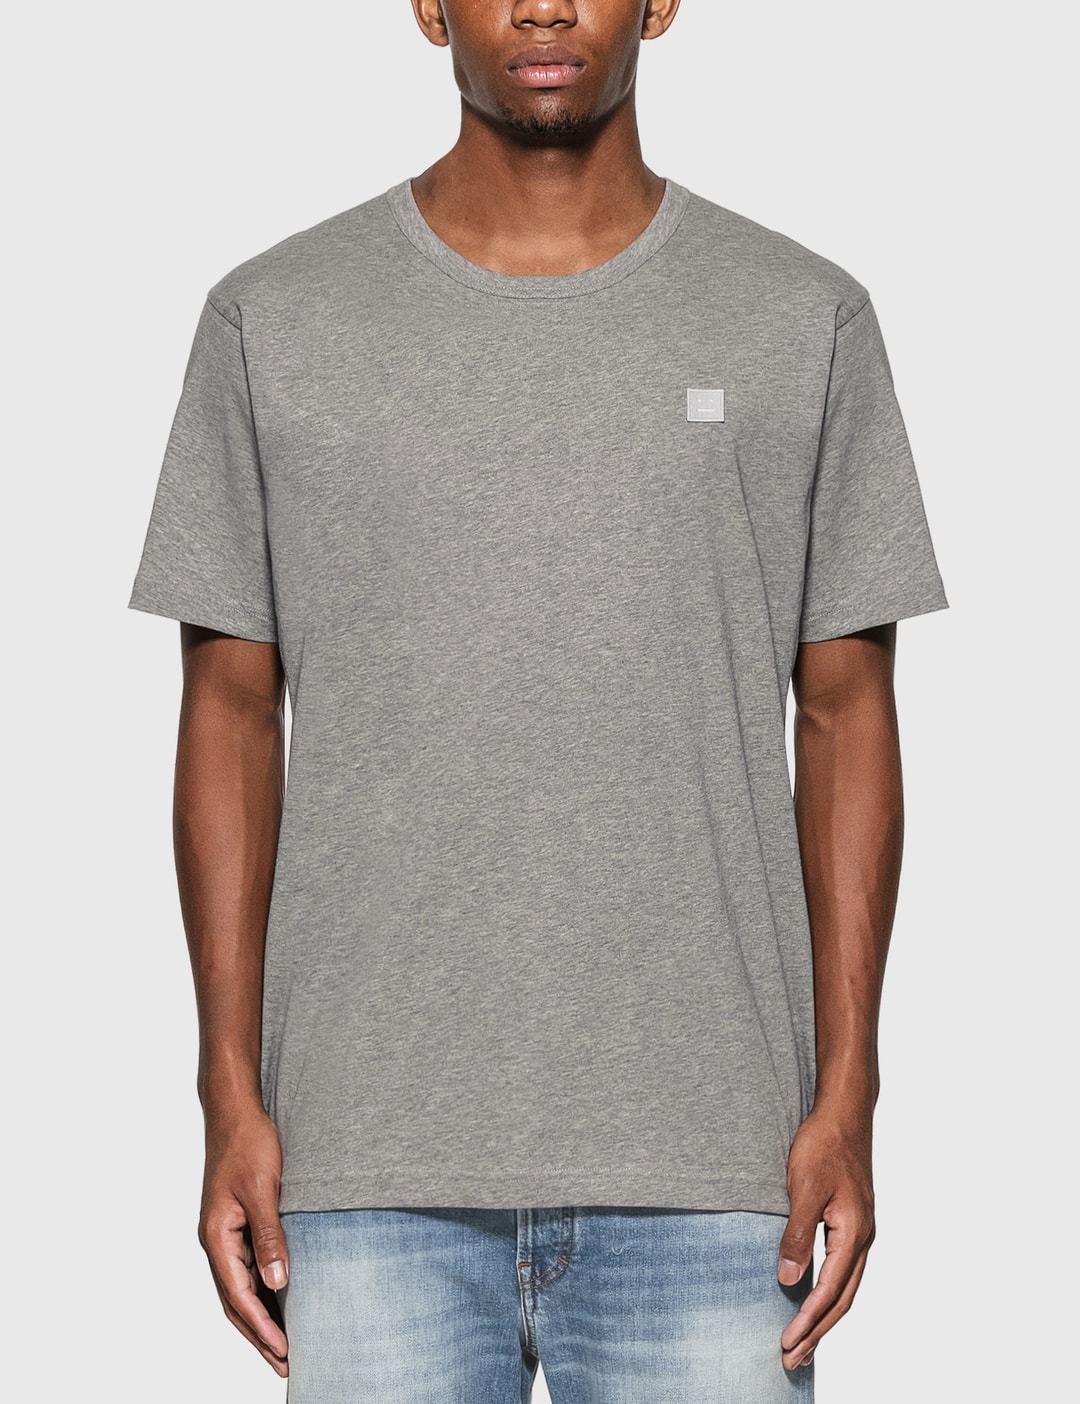 Acne Studios - Nash Face T-Shirt | HBX - Globally Curated and Lifestyle by Hypebeast